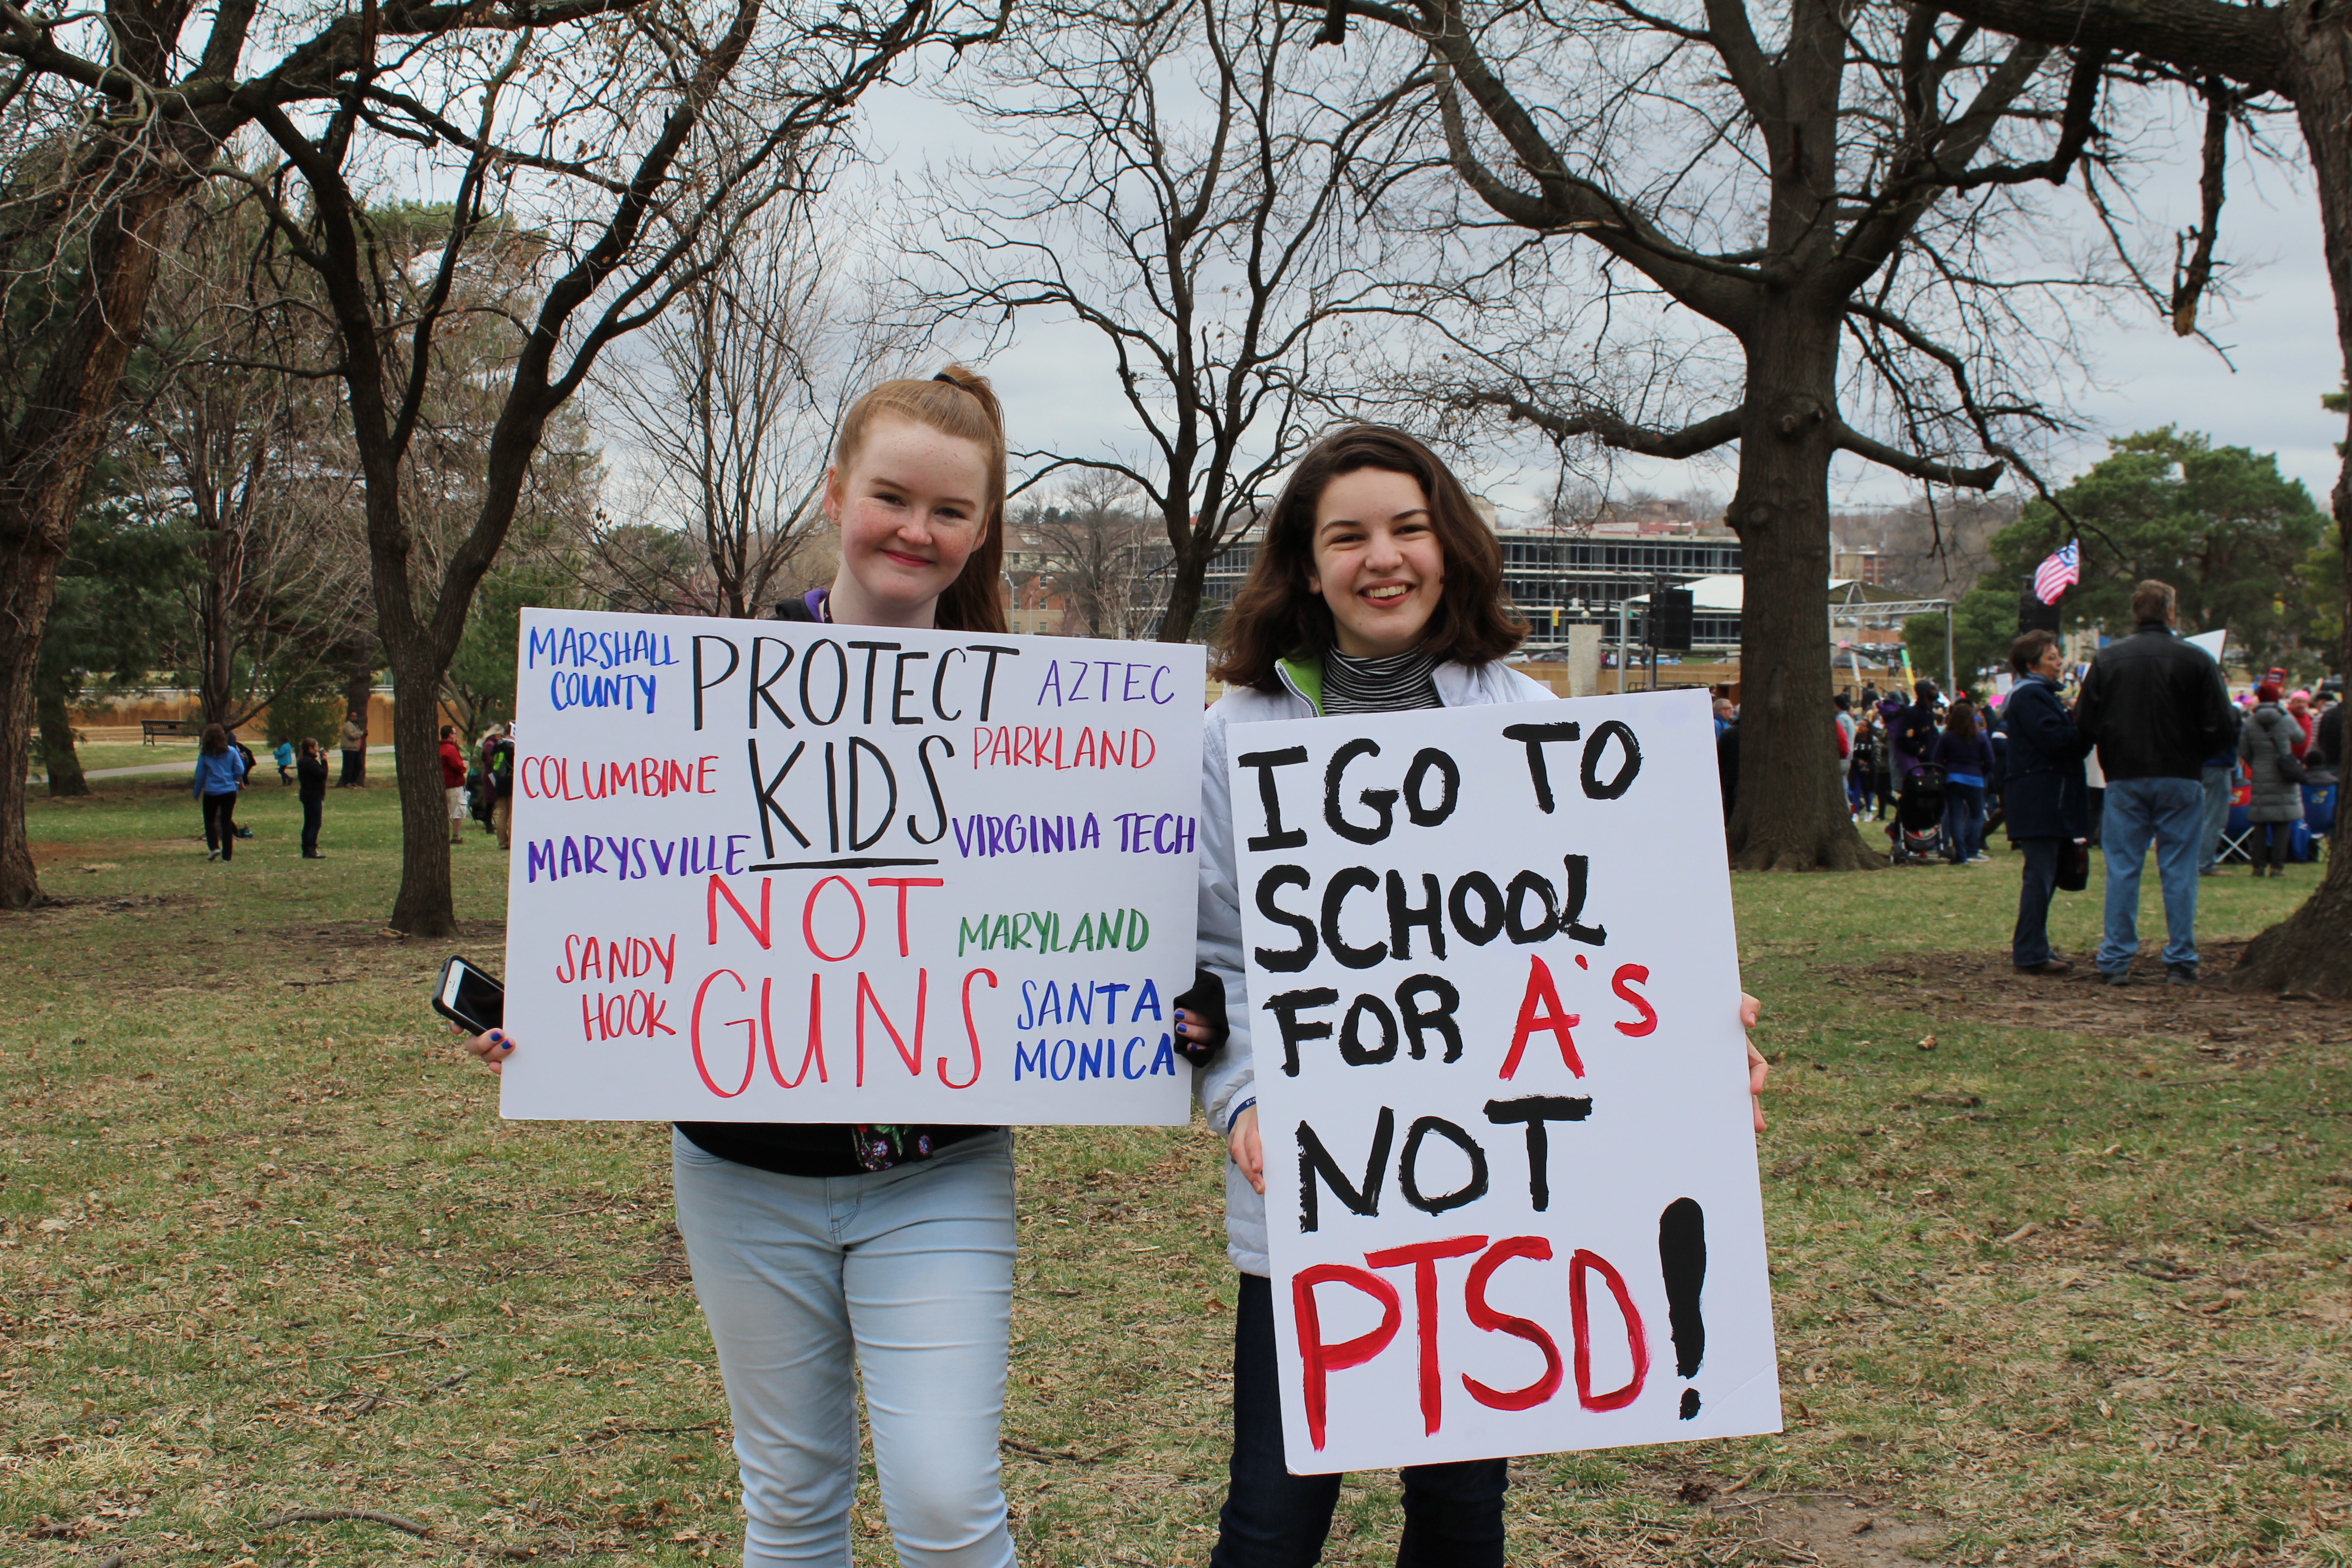 Two high school students, Claire and Gabriella, drove hours to be at the march in Kansas City. Many local high school students had taken initiative to put together the event, and the two wanted to be a part of the historic moment. “I just think the (Shawnee Mission) East kids are fantastic for even wanting to put it together,” Gabrielle said. Photo: Carina Smith, 14 East.